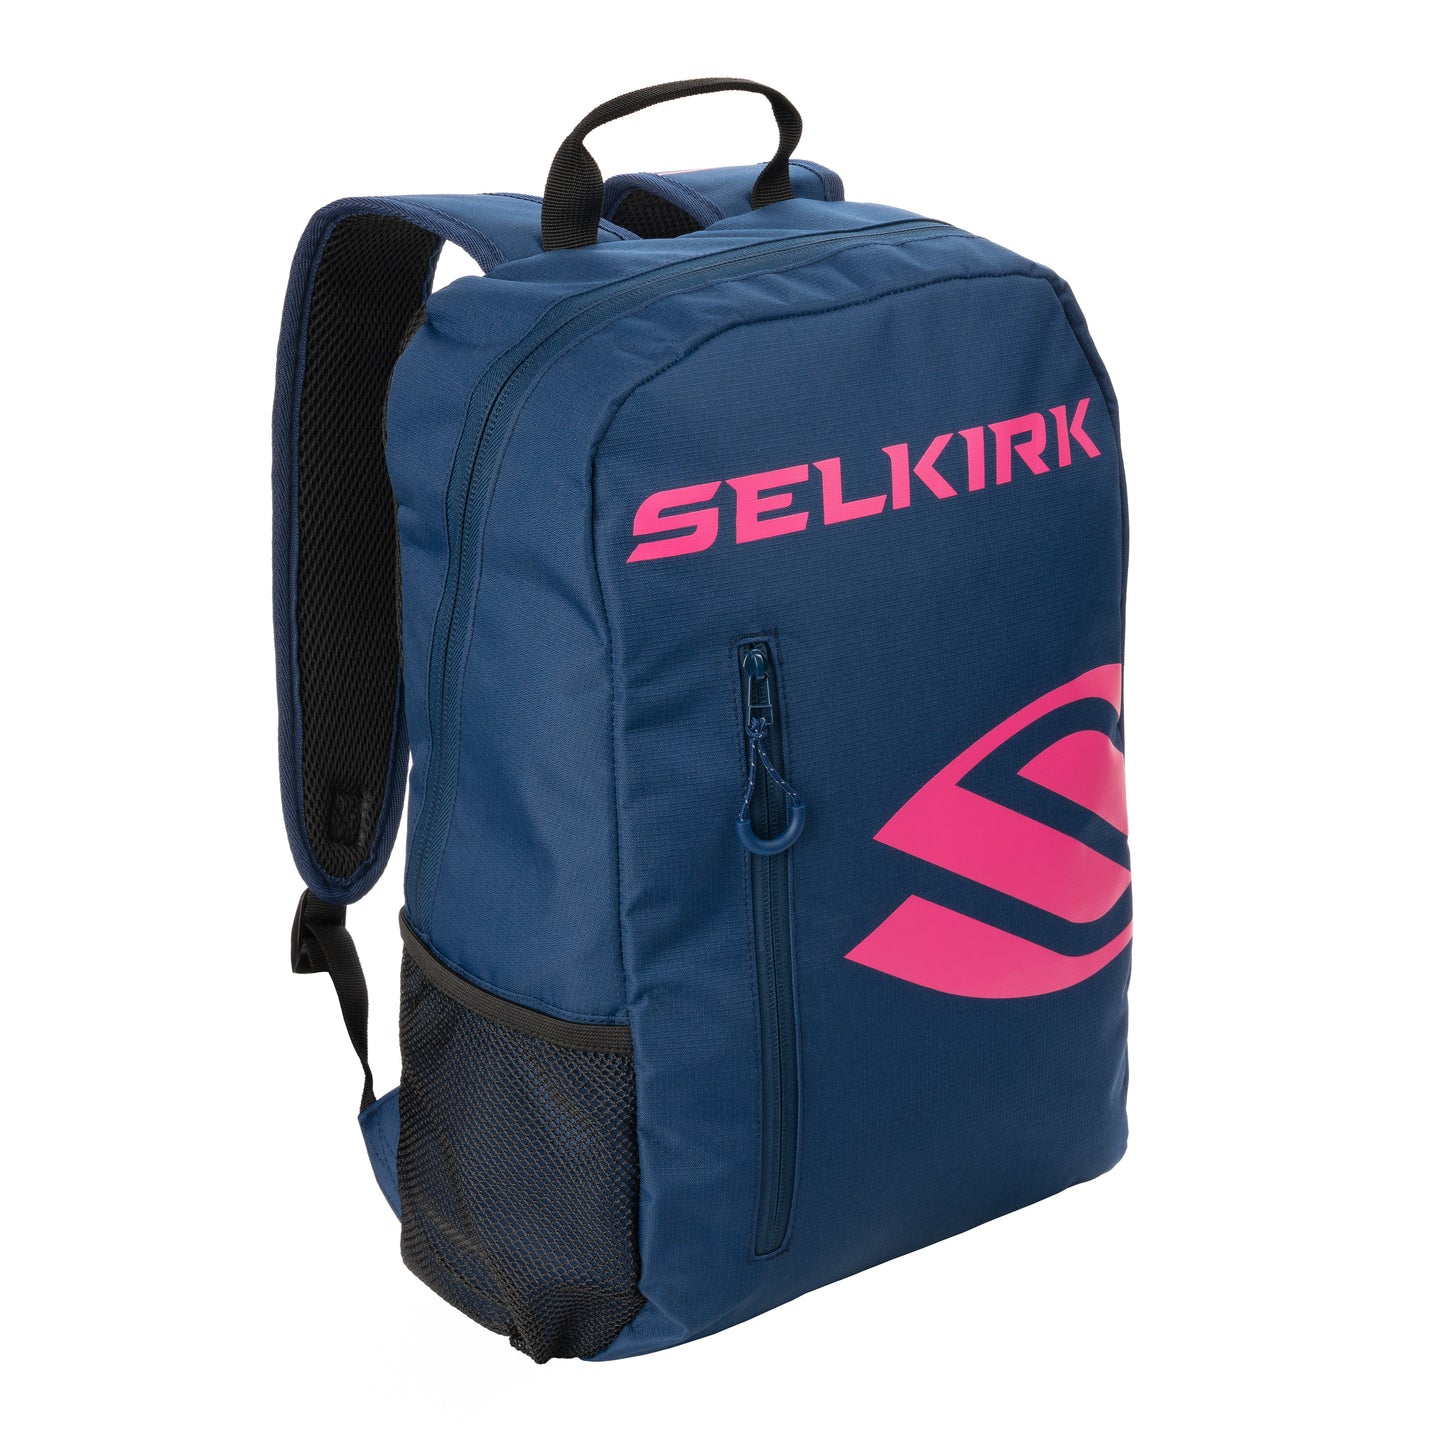 A Selkirk Core Series Day Backpack Pickleball Bag with the word selikr on it.